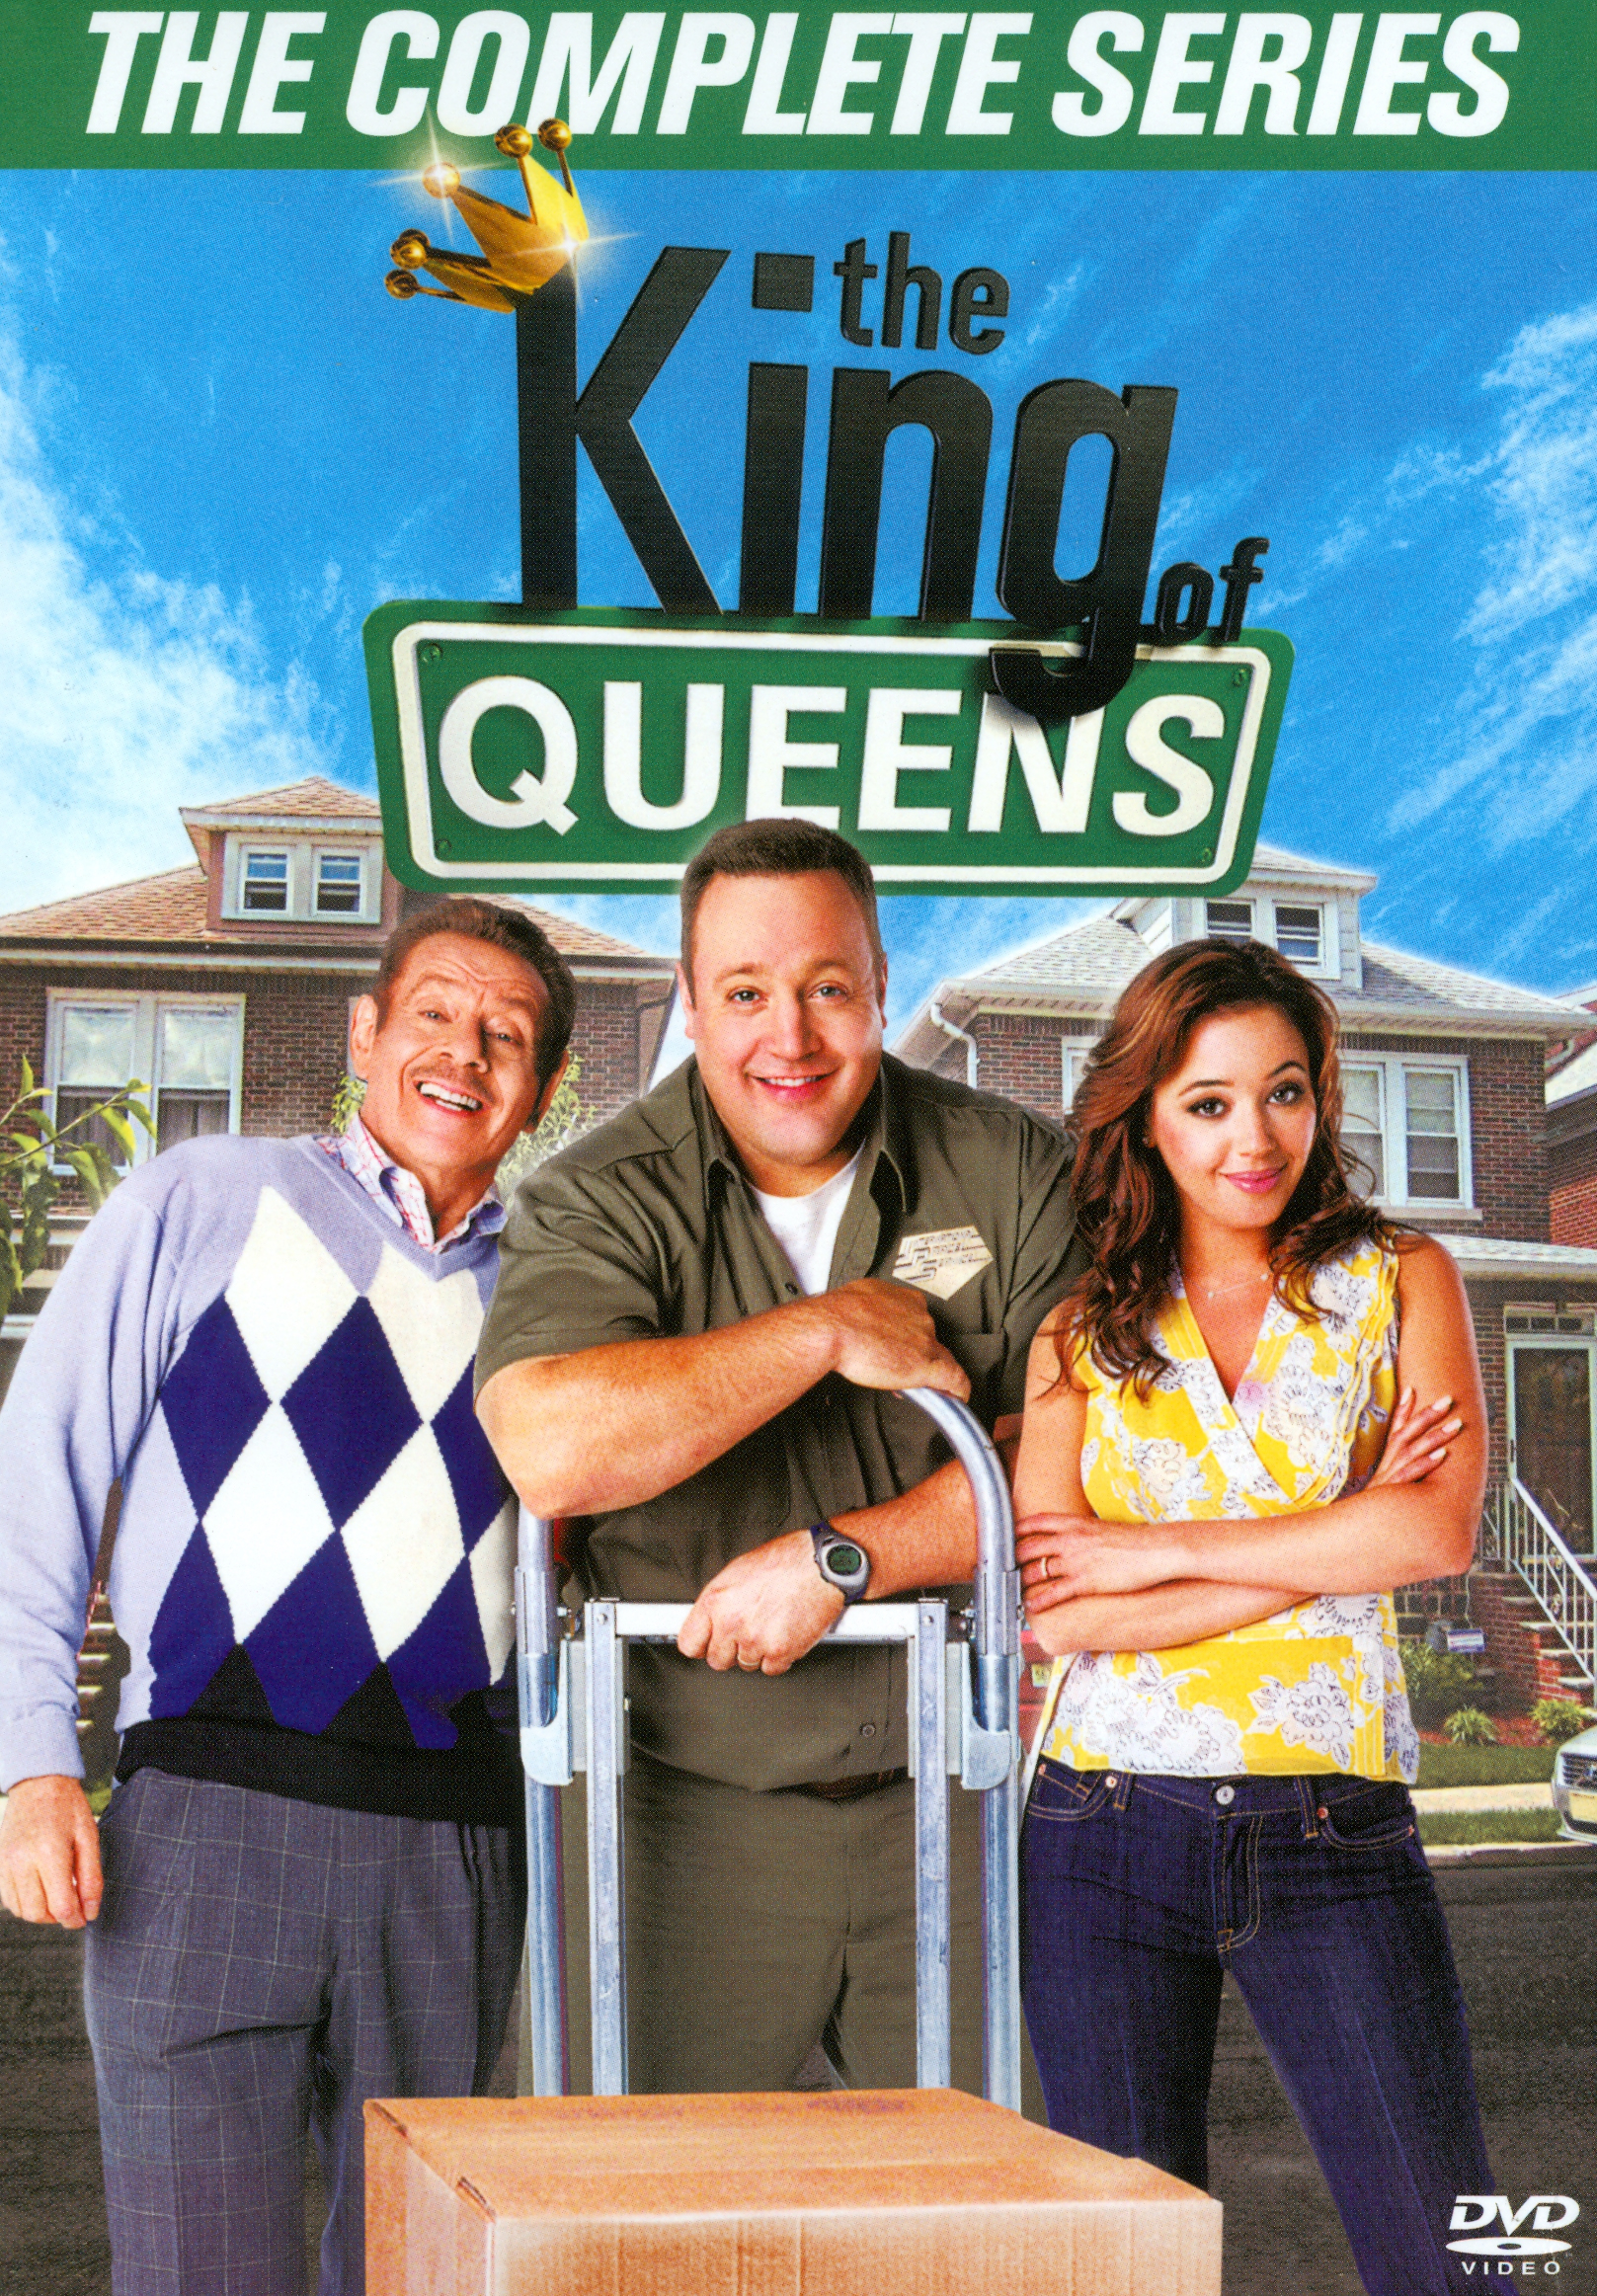 The King of Queens: Season 1 2 3 - DVD - VERY GOOD 43396108134